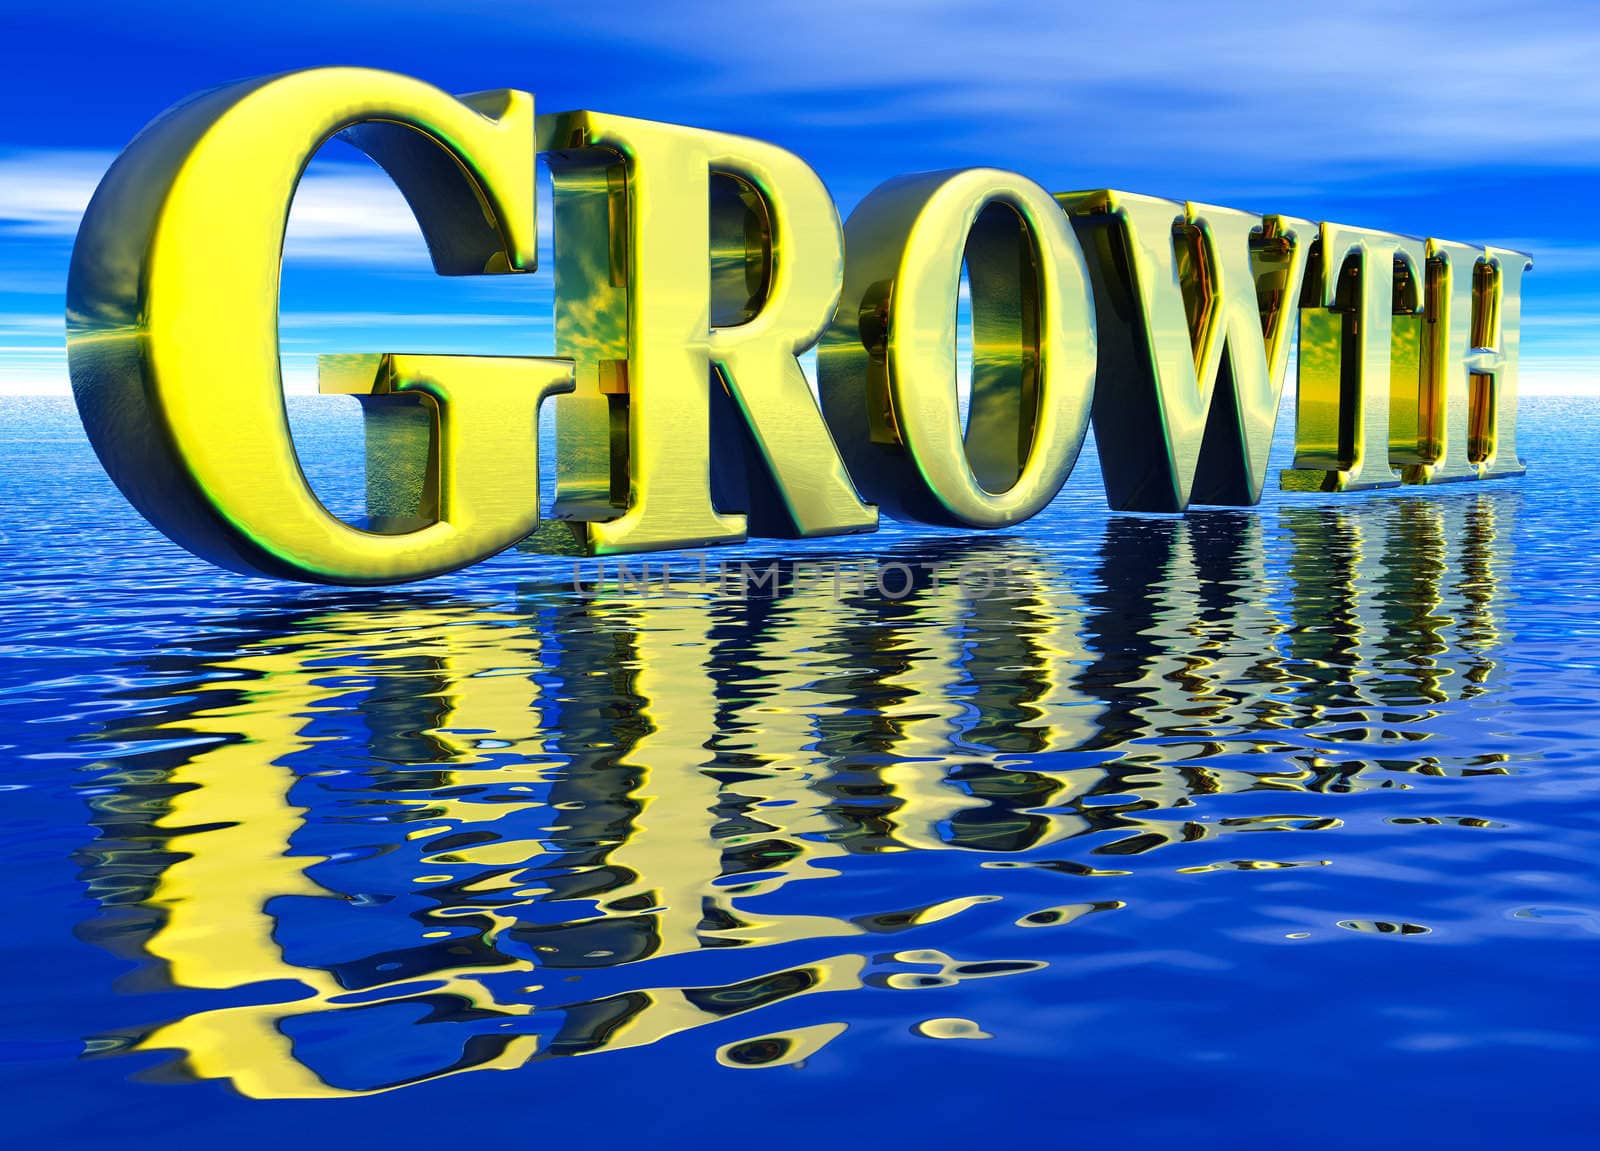 Gold Large Growth Text in 3d floating Big Over Water Ocean